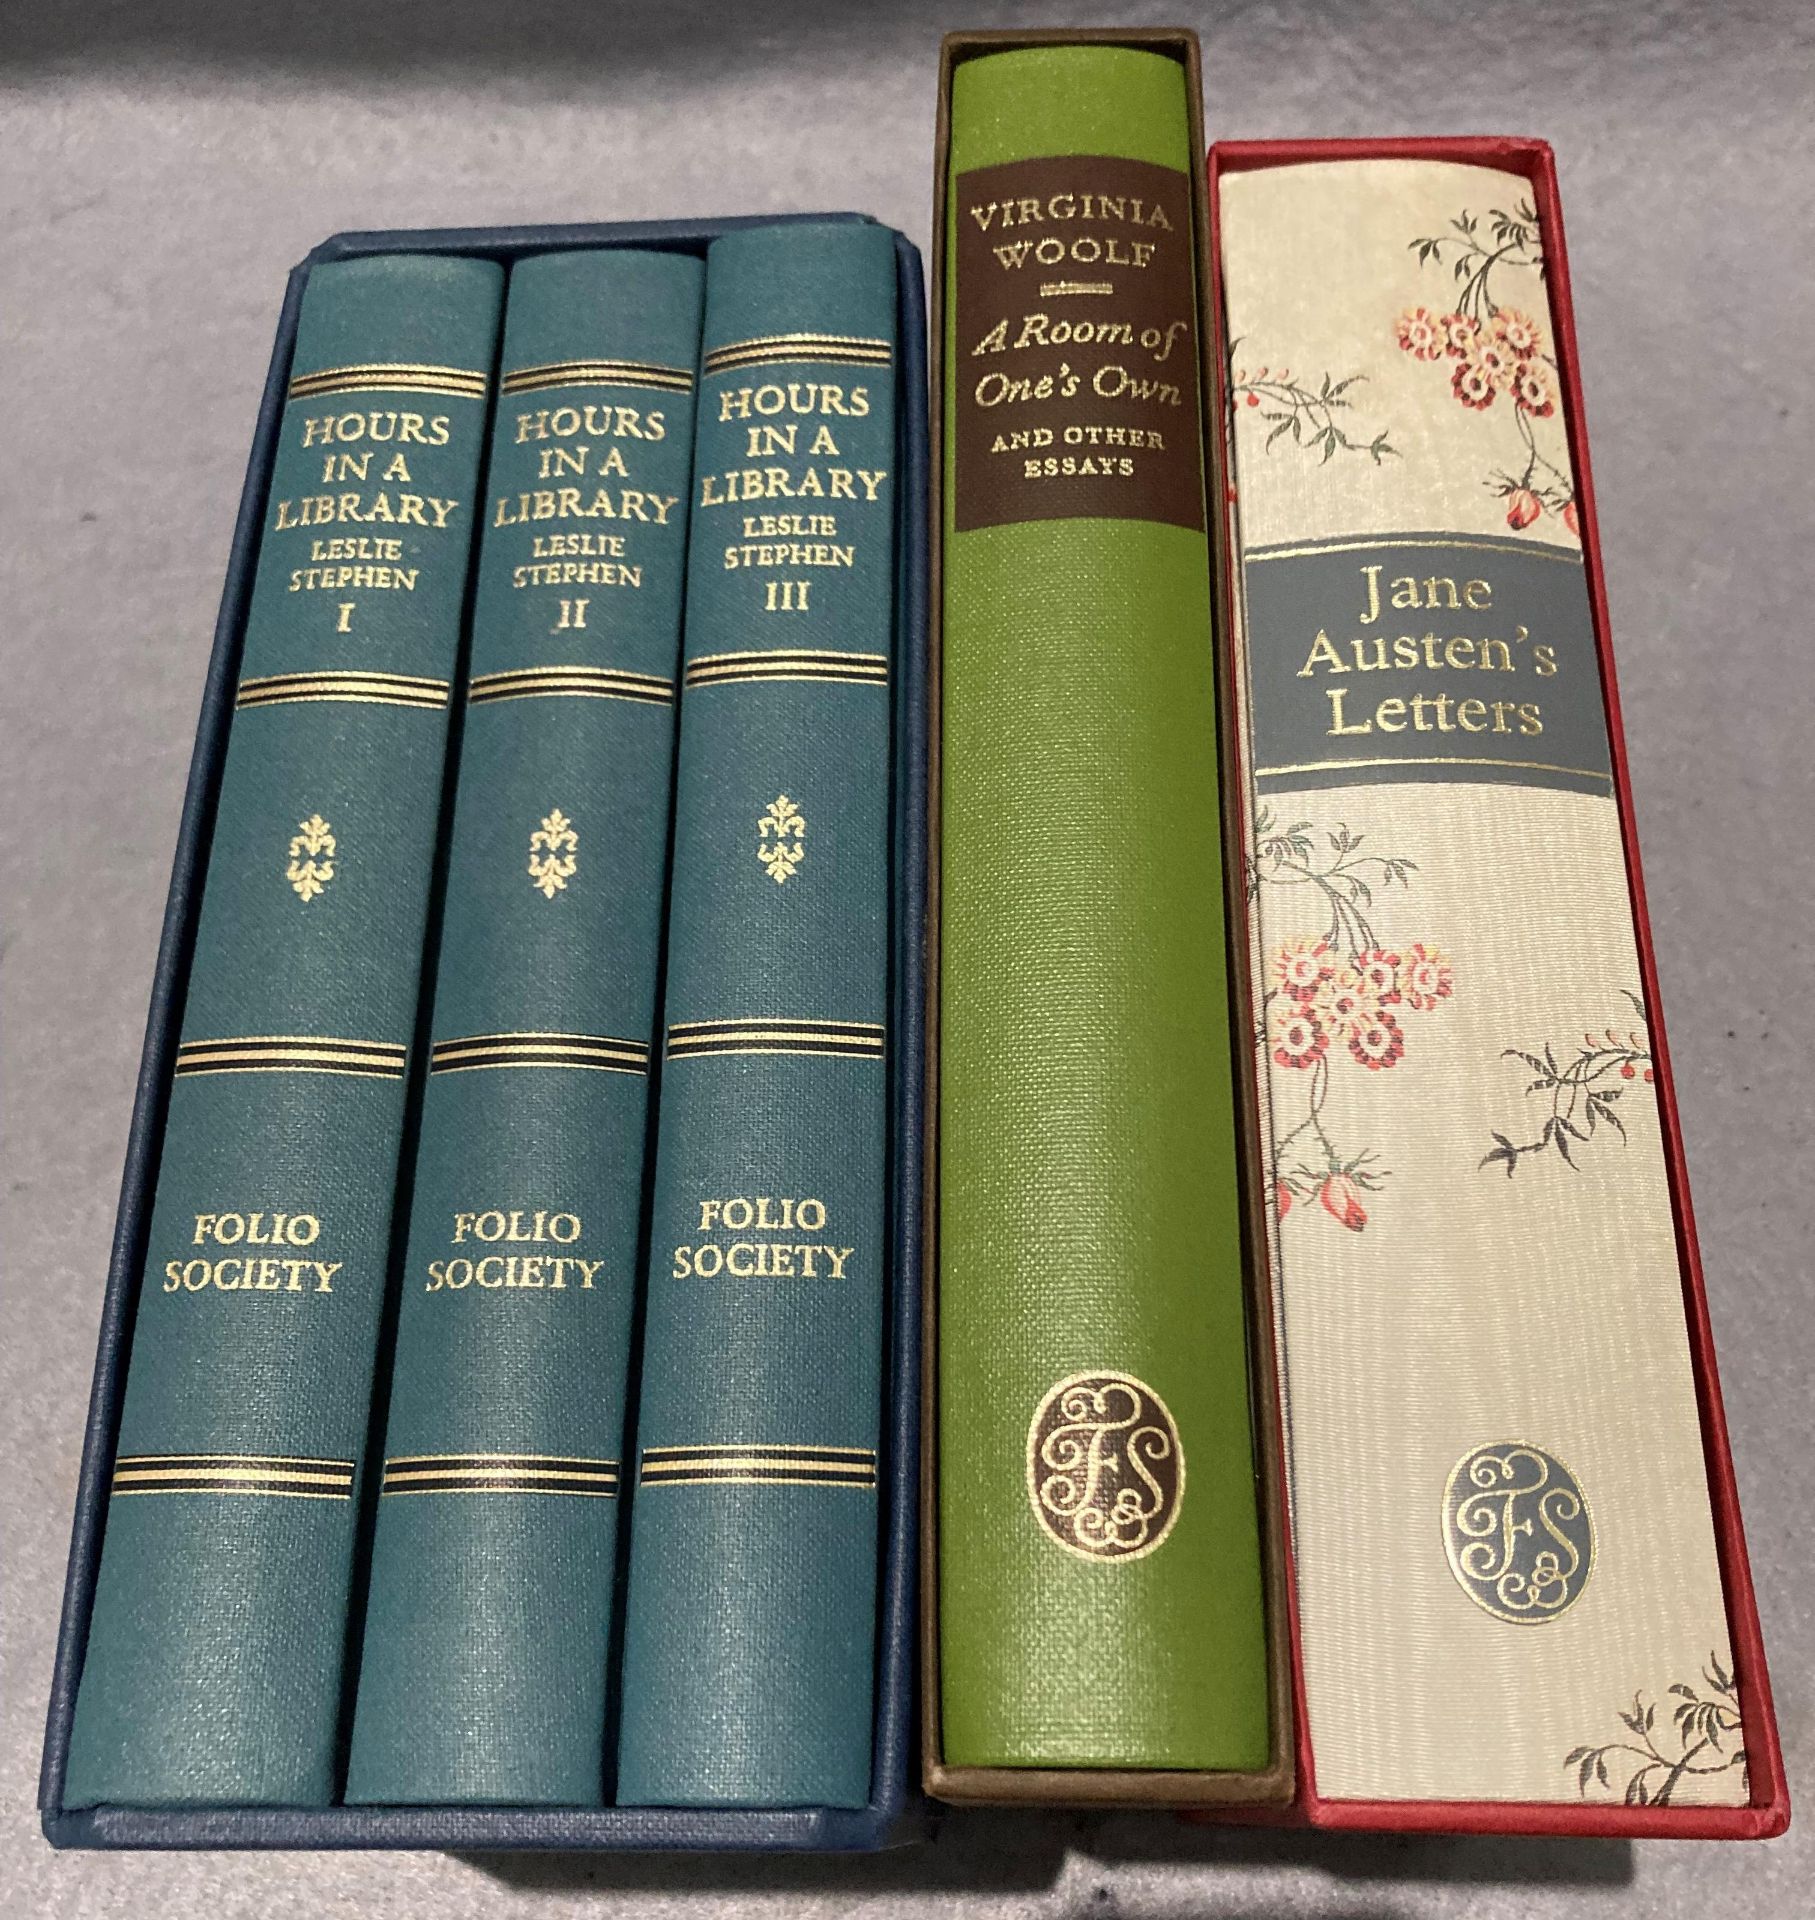 Folio Society - a boxed thee book set by Leslie Stephen 'Hours in a Library' together with two